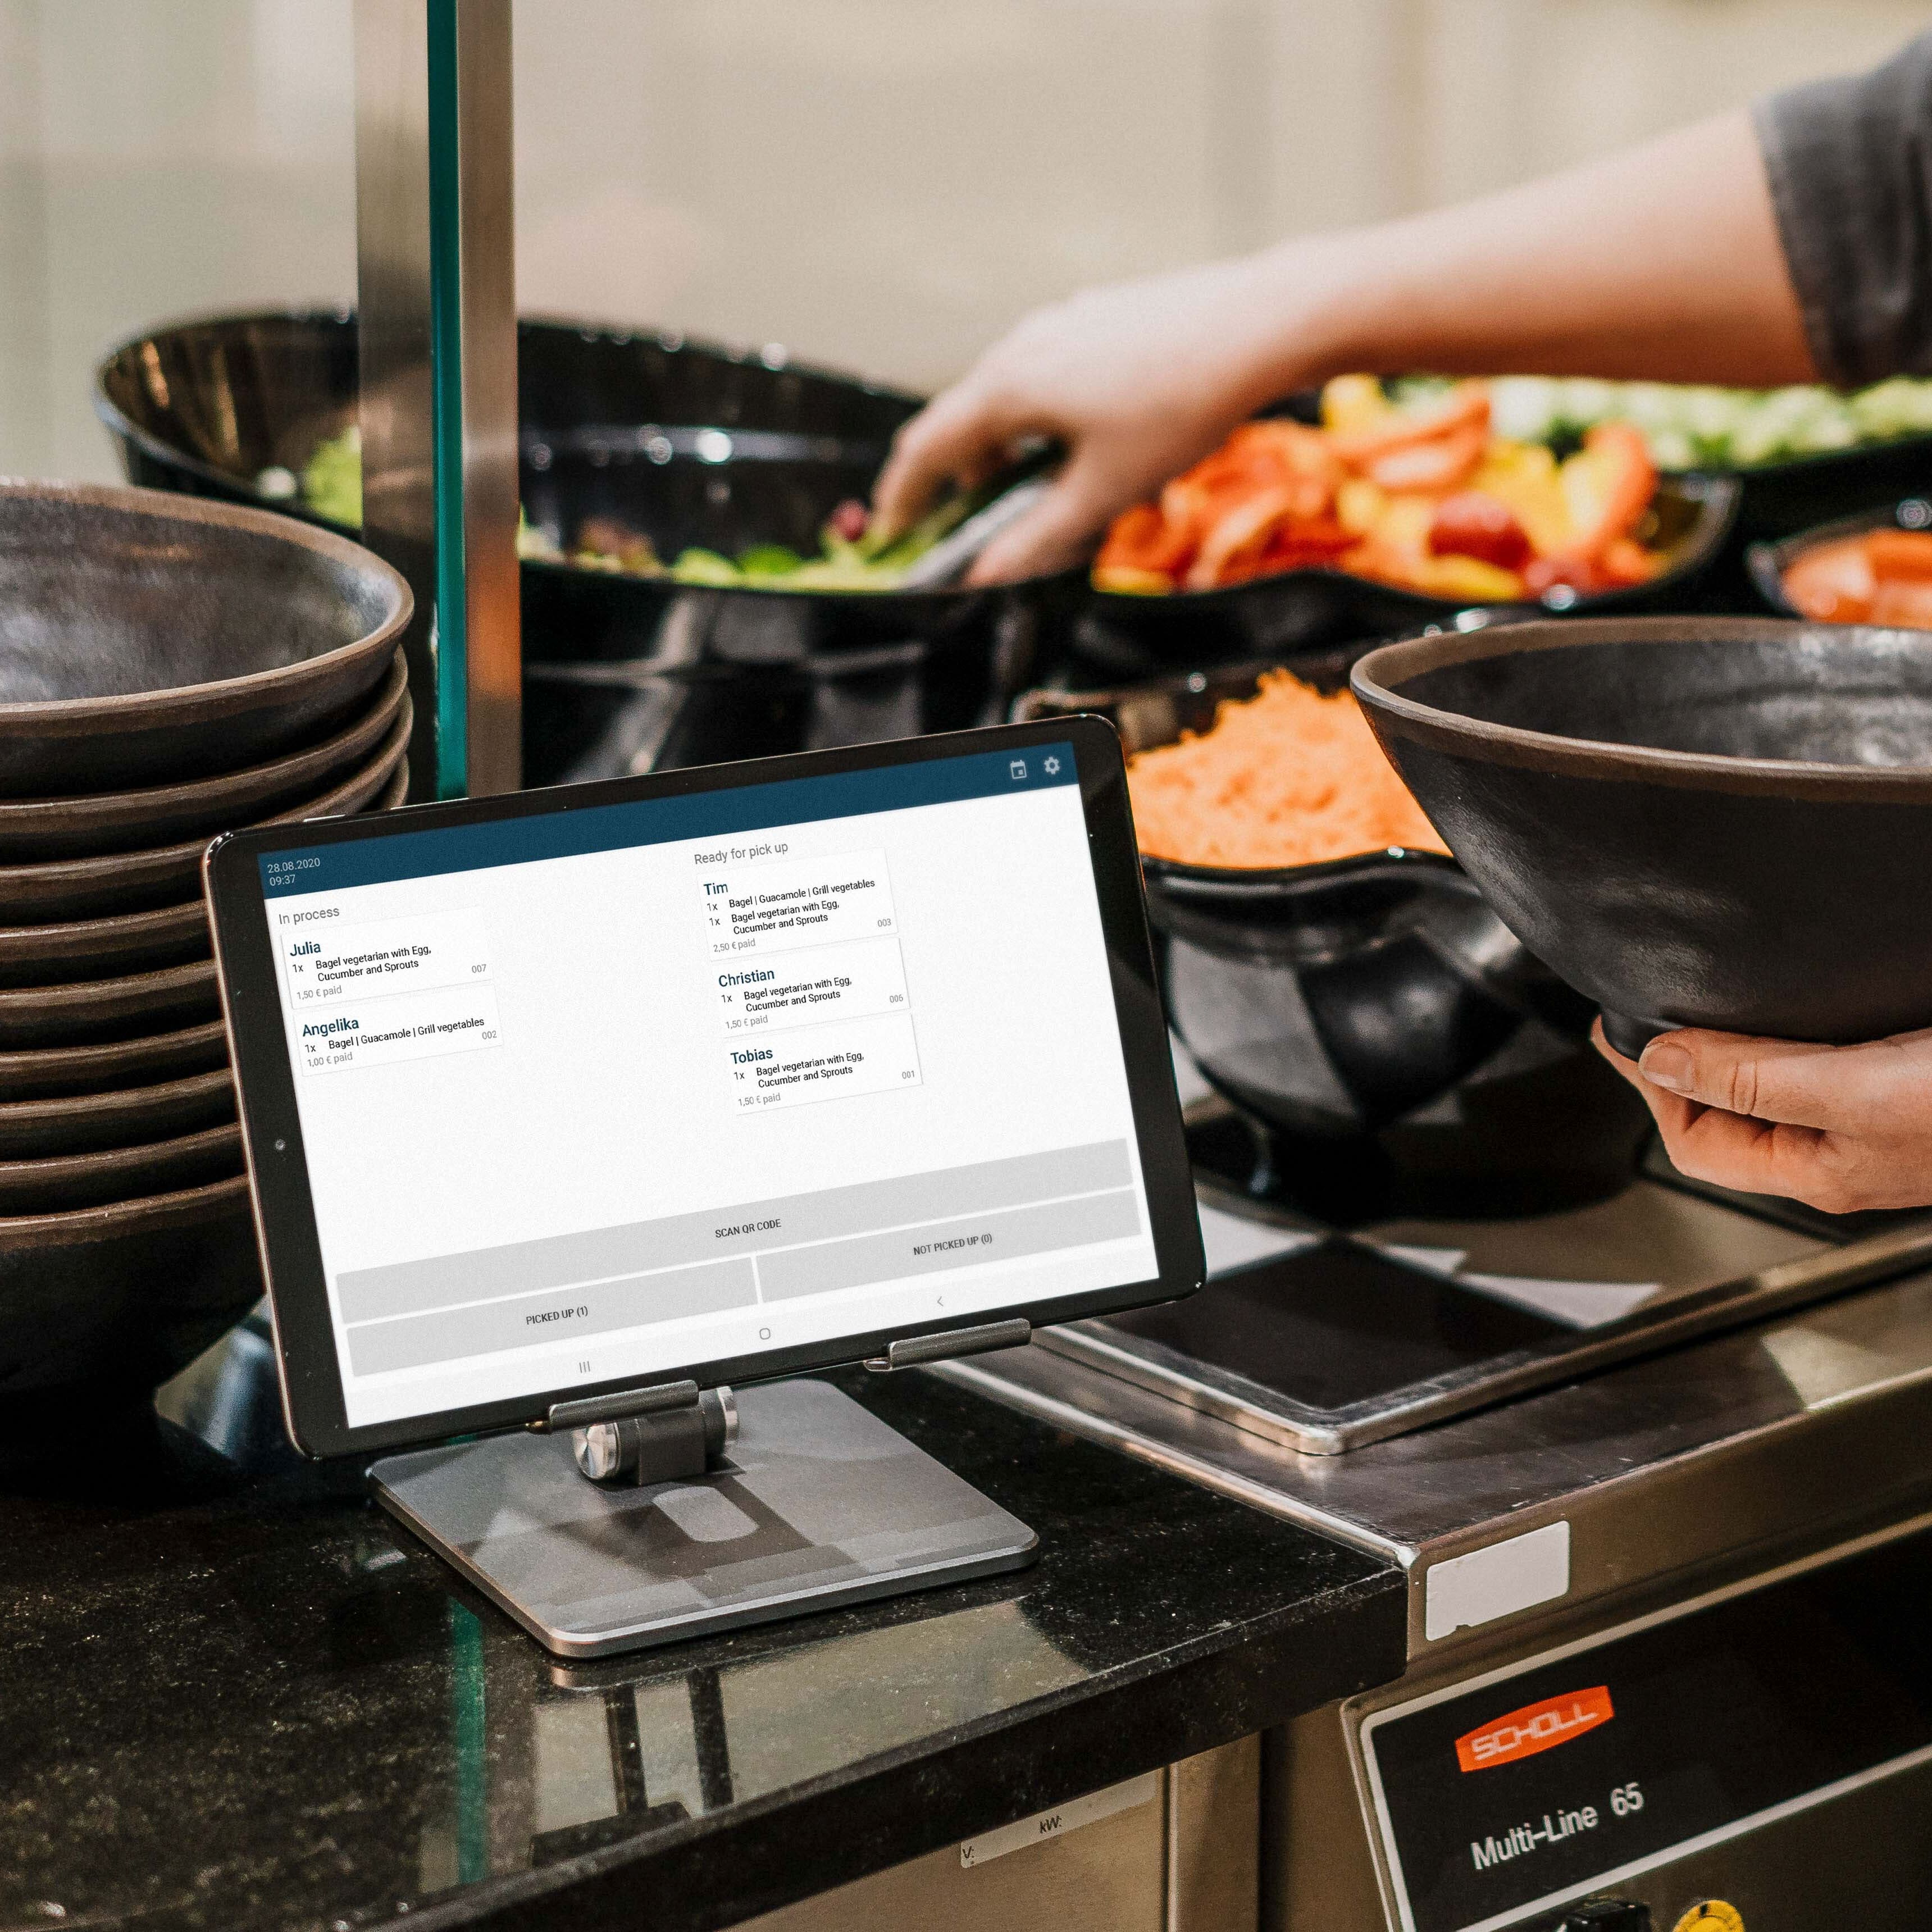 Simplify the coordination of pre-orders and their processing in the kitchen.